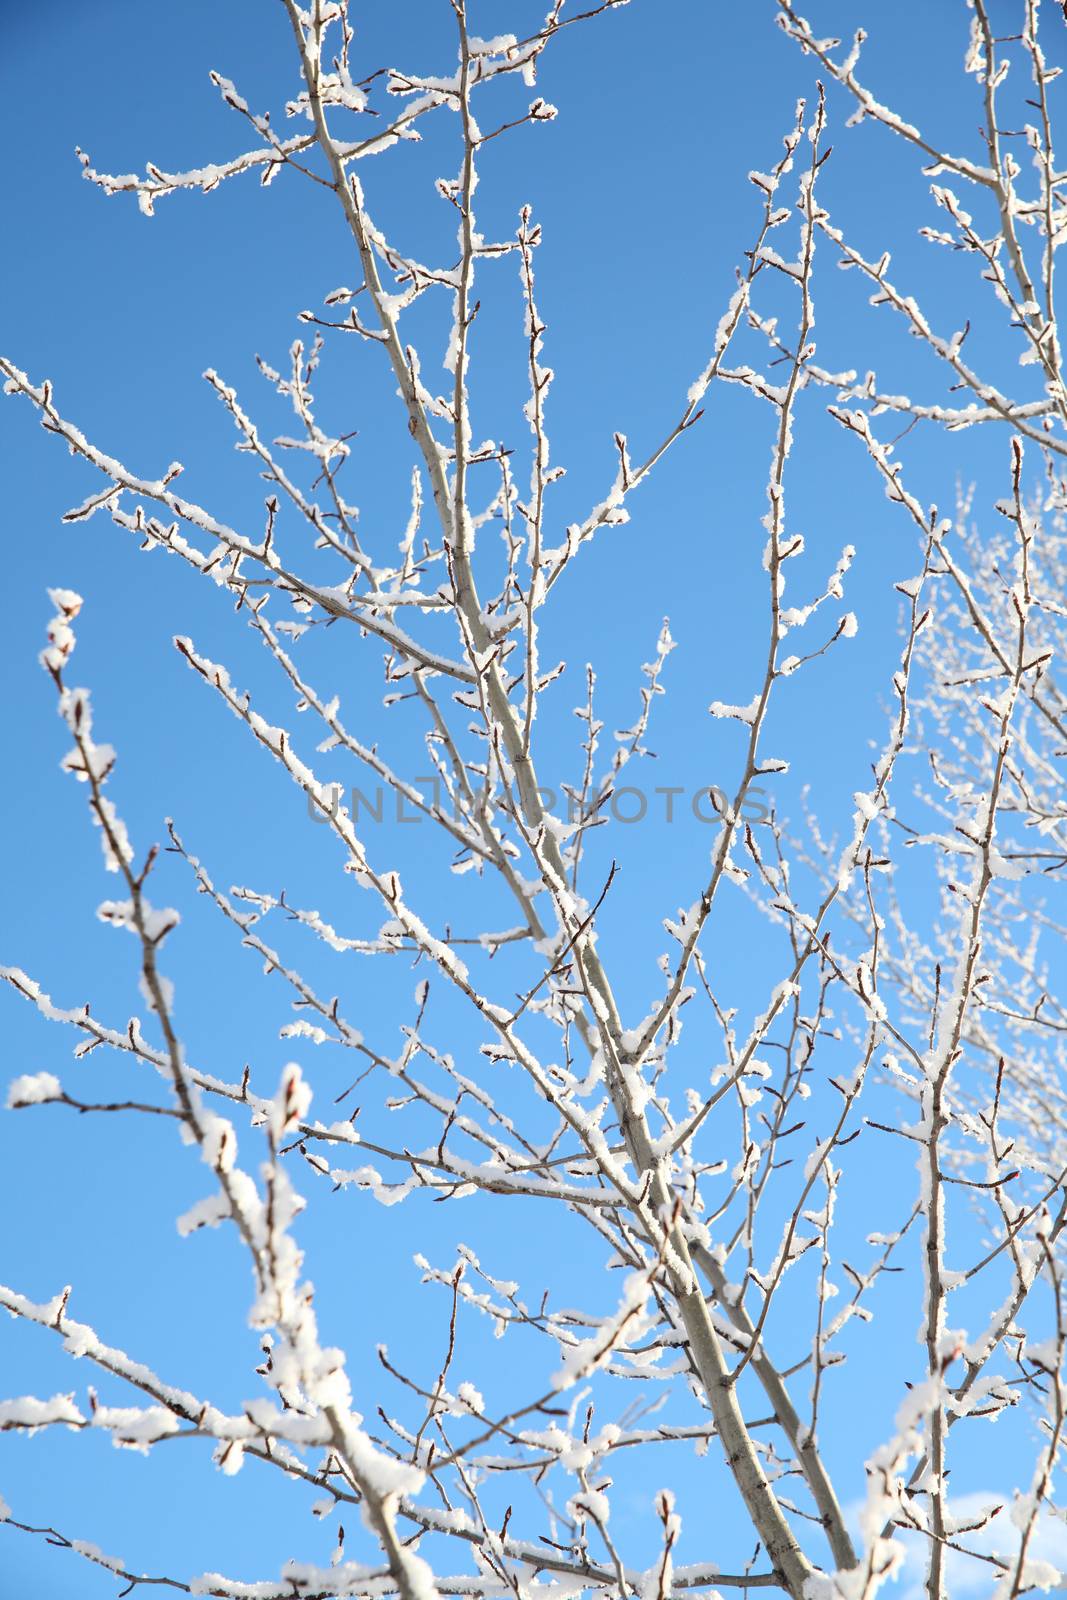 Snow covered twigs against a bright blue sky